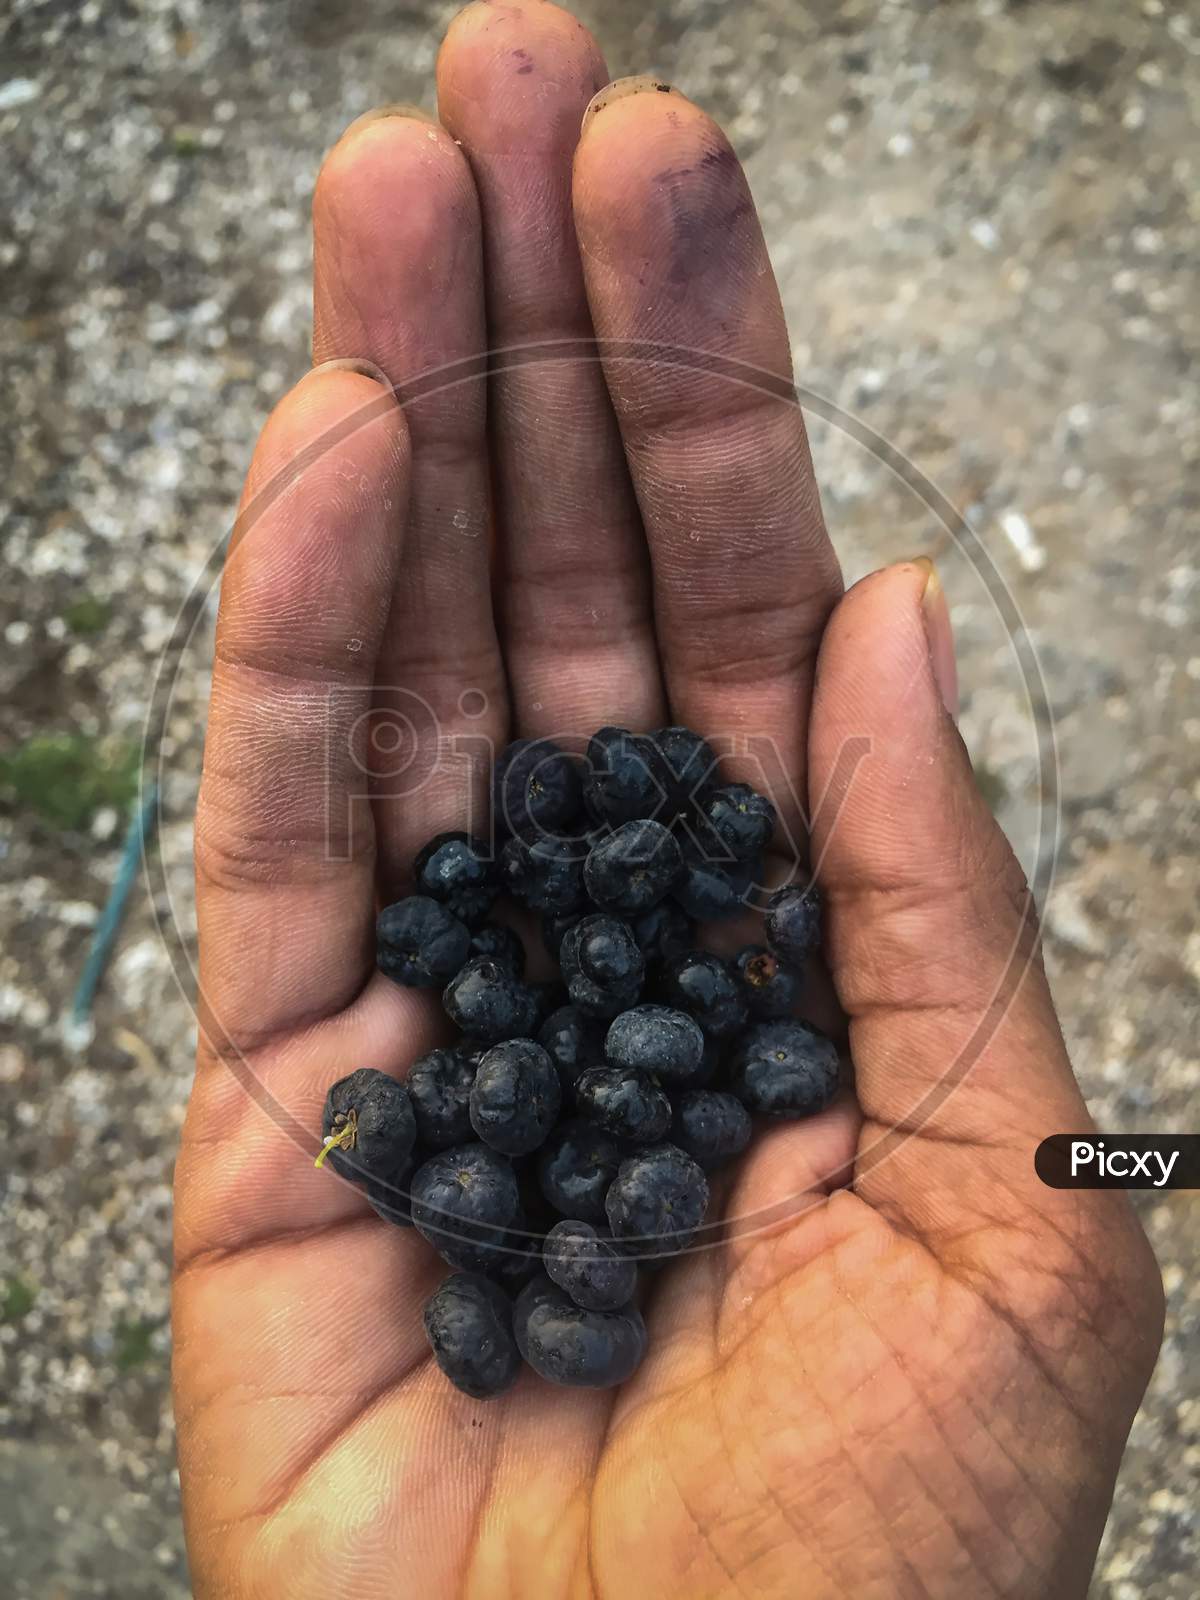 Nainital/India - May 8, 2020: blueberries in a hand, natural fruit in nainital forest